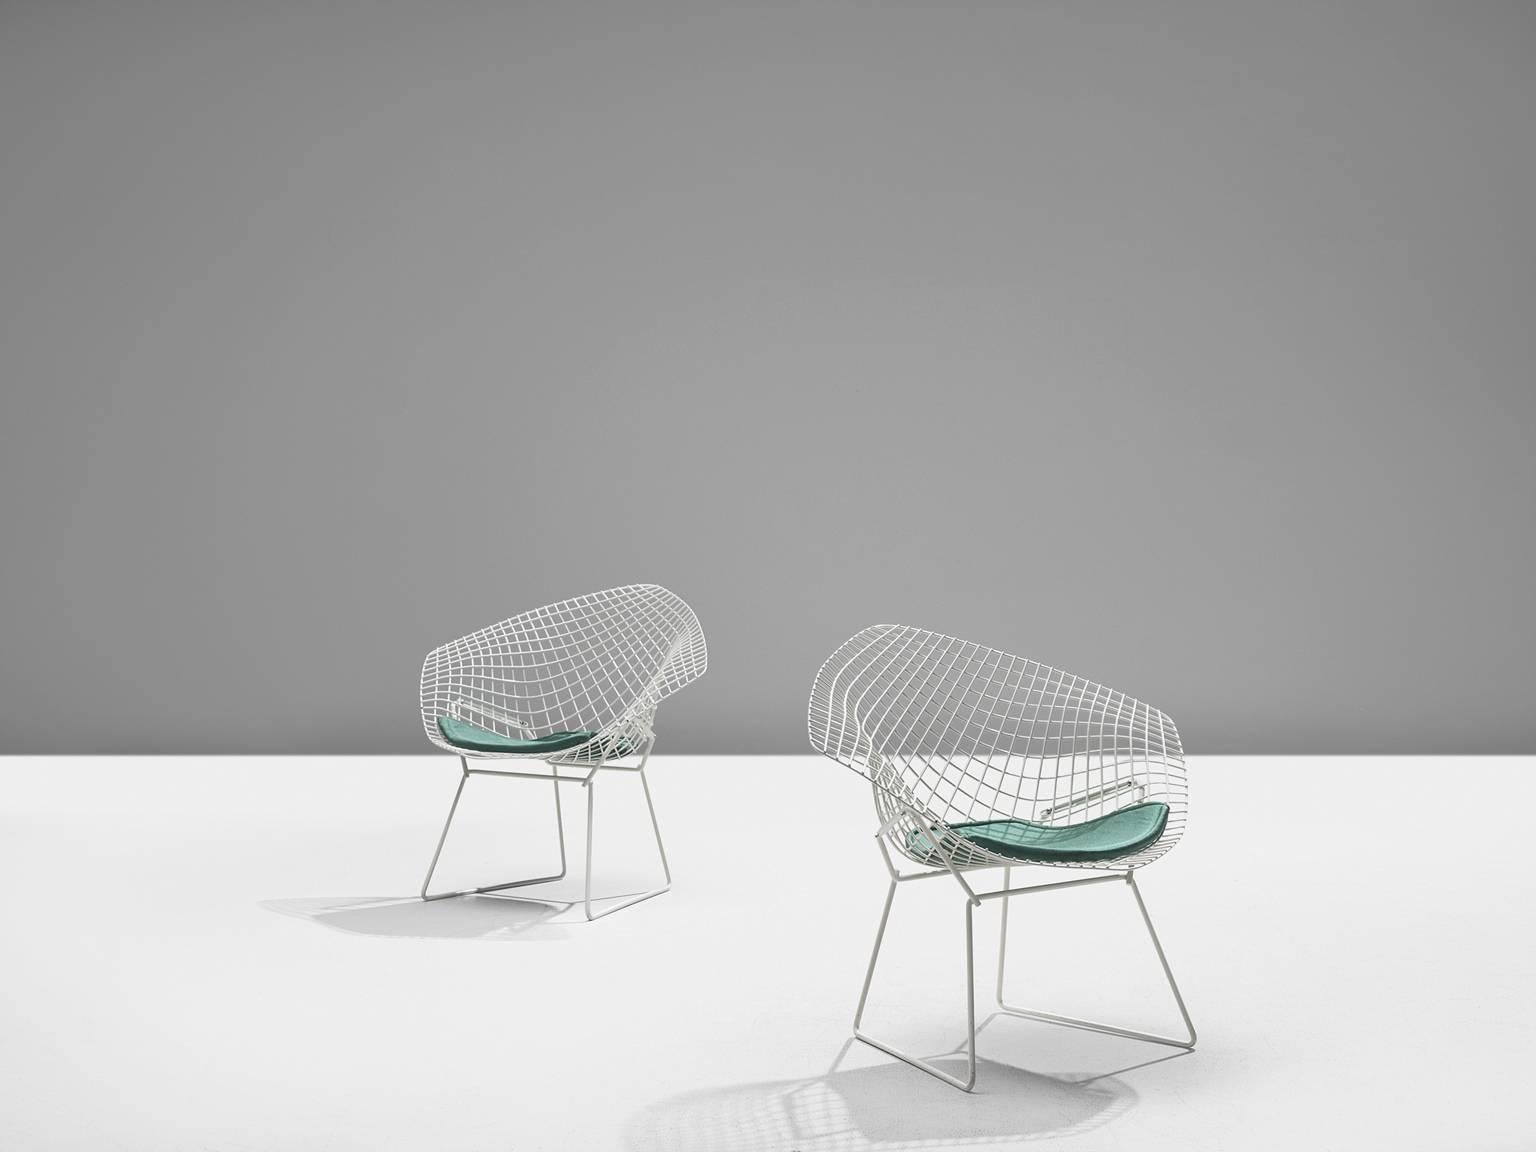 Pair of 'Diamond' chairs by Harry Bertoia for Knoll, white coated metal, turquoise cushion, 1950s (later production)

The Diamond Chair is, according to Knoll, an astounding study in space, form and function by one of the master sculptors of the